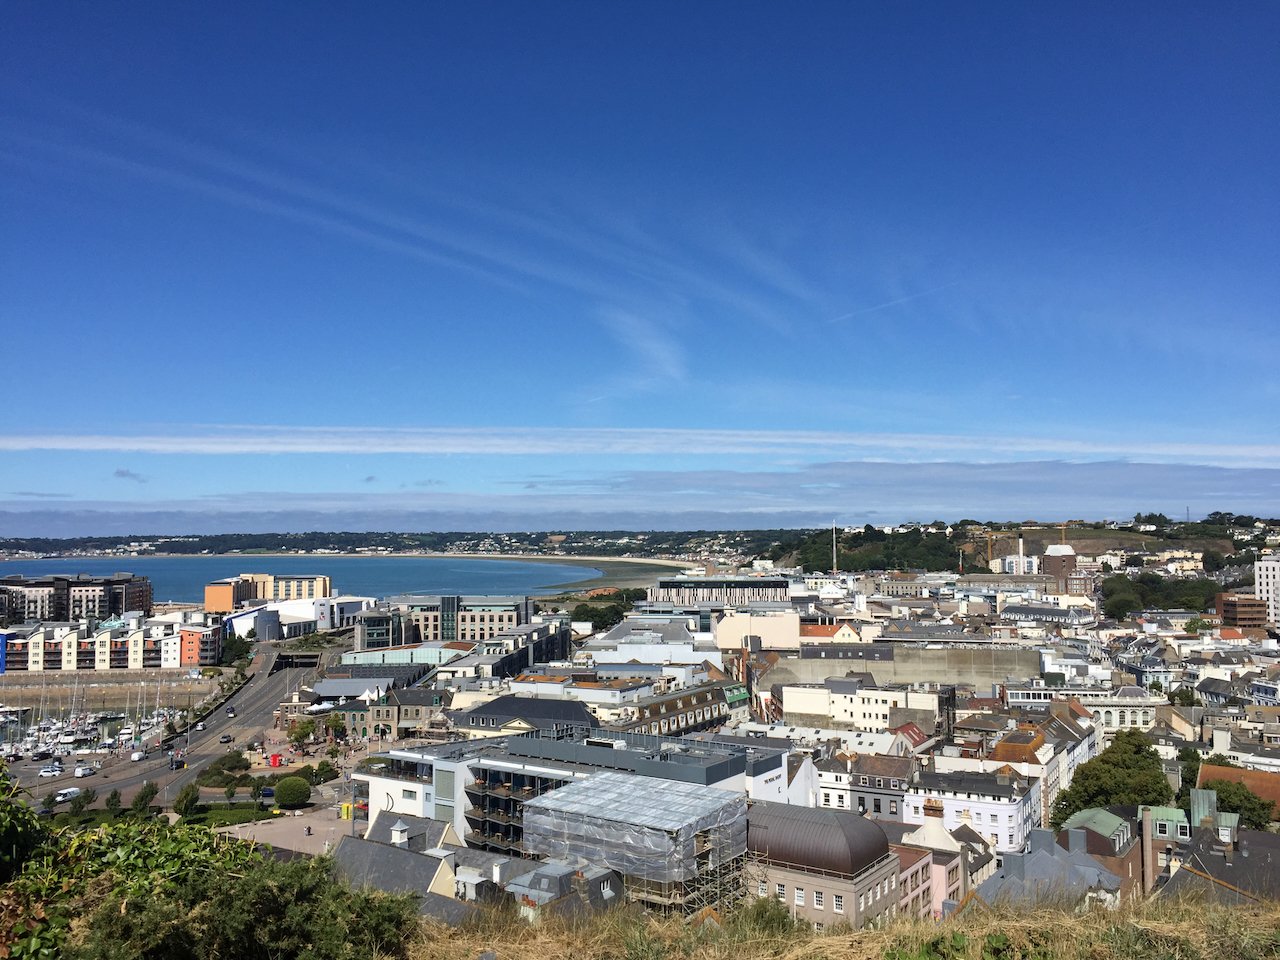 St Helier, Jersey. Photographed from Fort Regent, facing West, in the afternoon summer sun, with blue skies and a variety of buildings in the skyline.